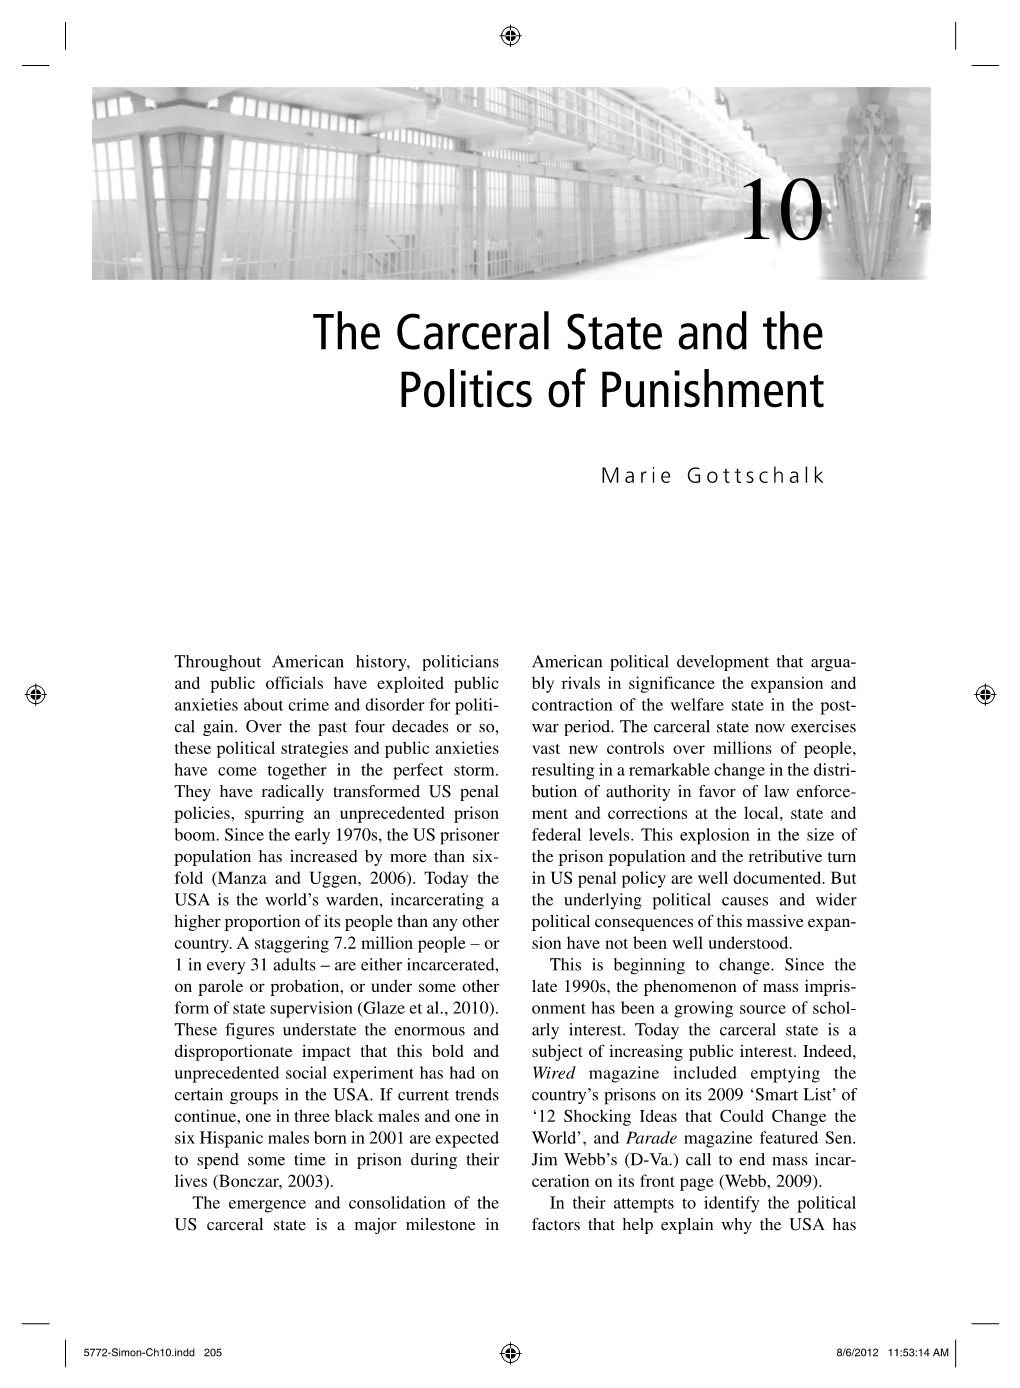 The Carceral State and the Politics of Punishment